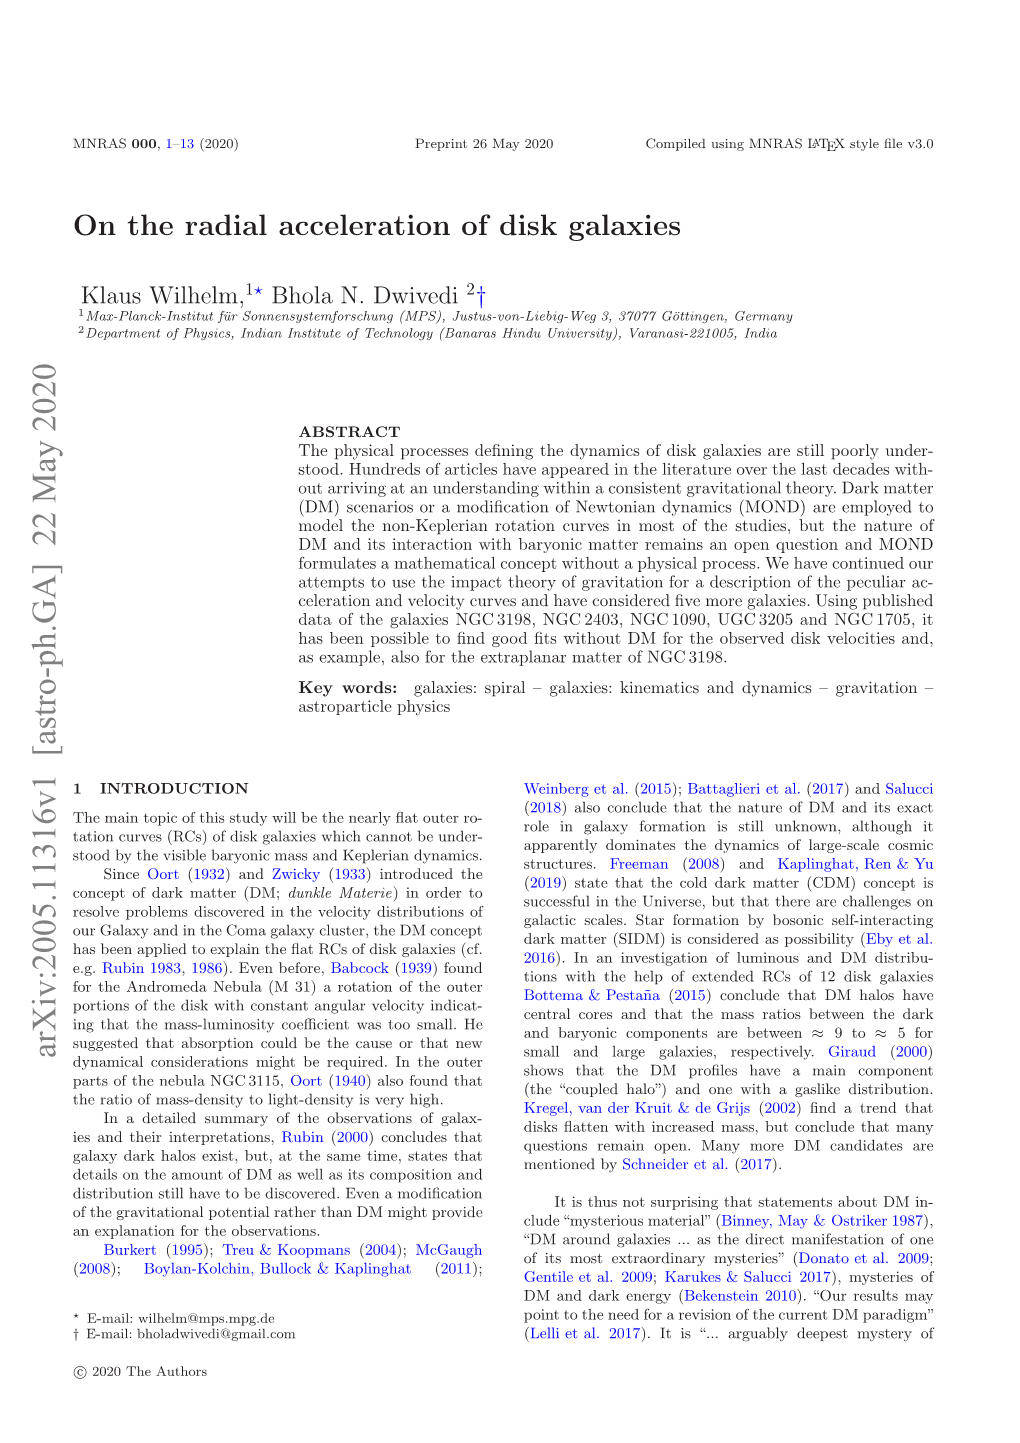 On the Radial Acceleration of Disk Galaxies 3